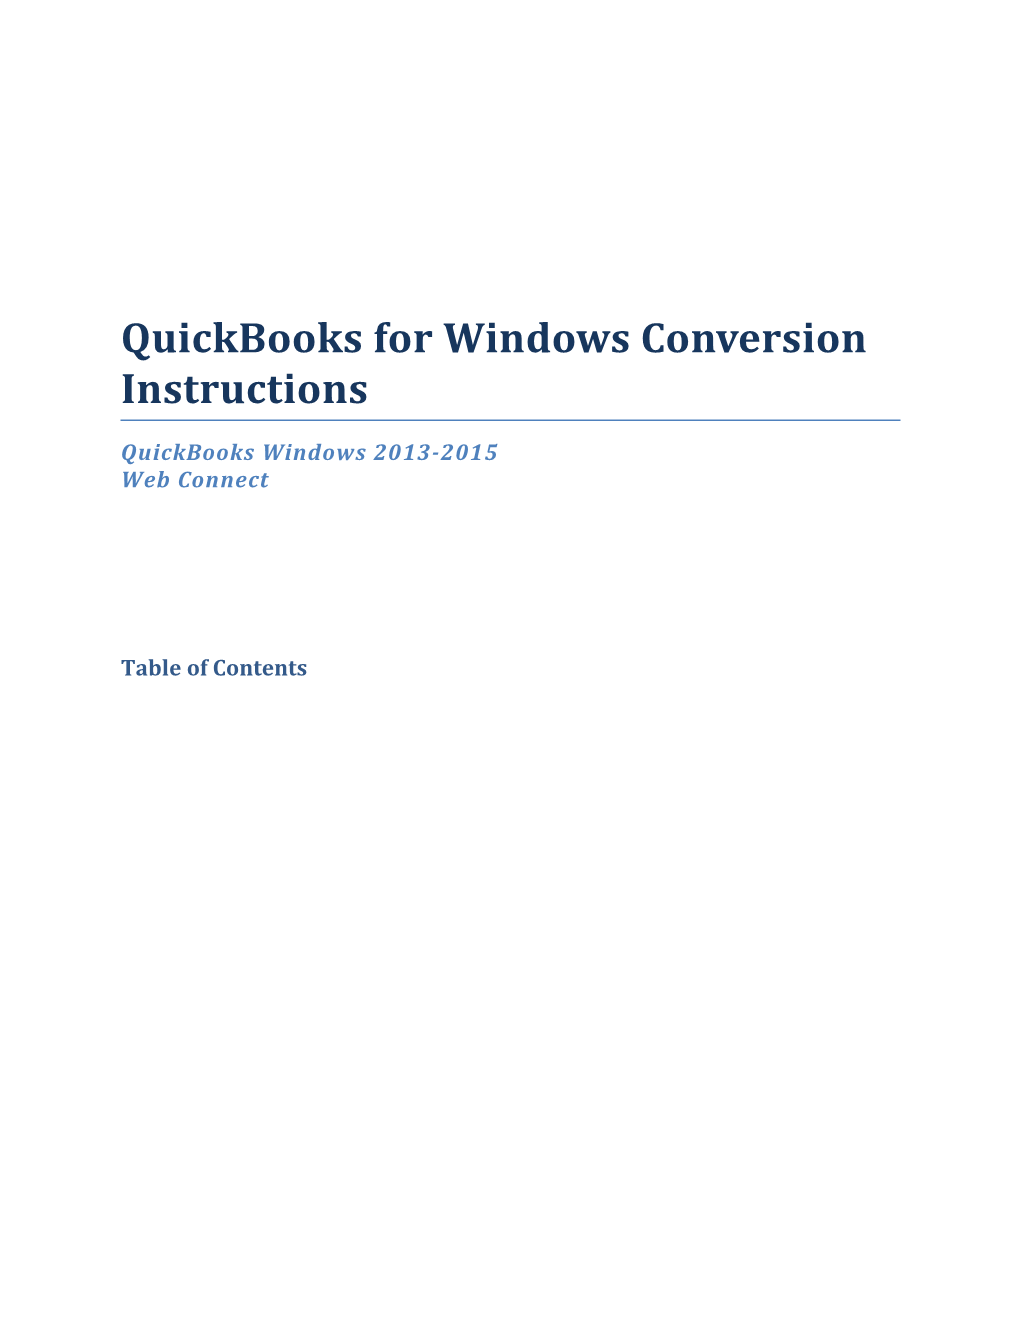 Quickbooks for Windows Conversion Instructions